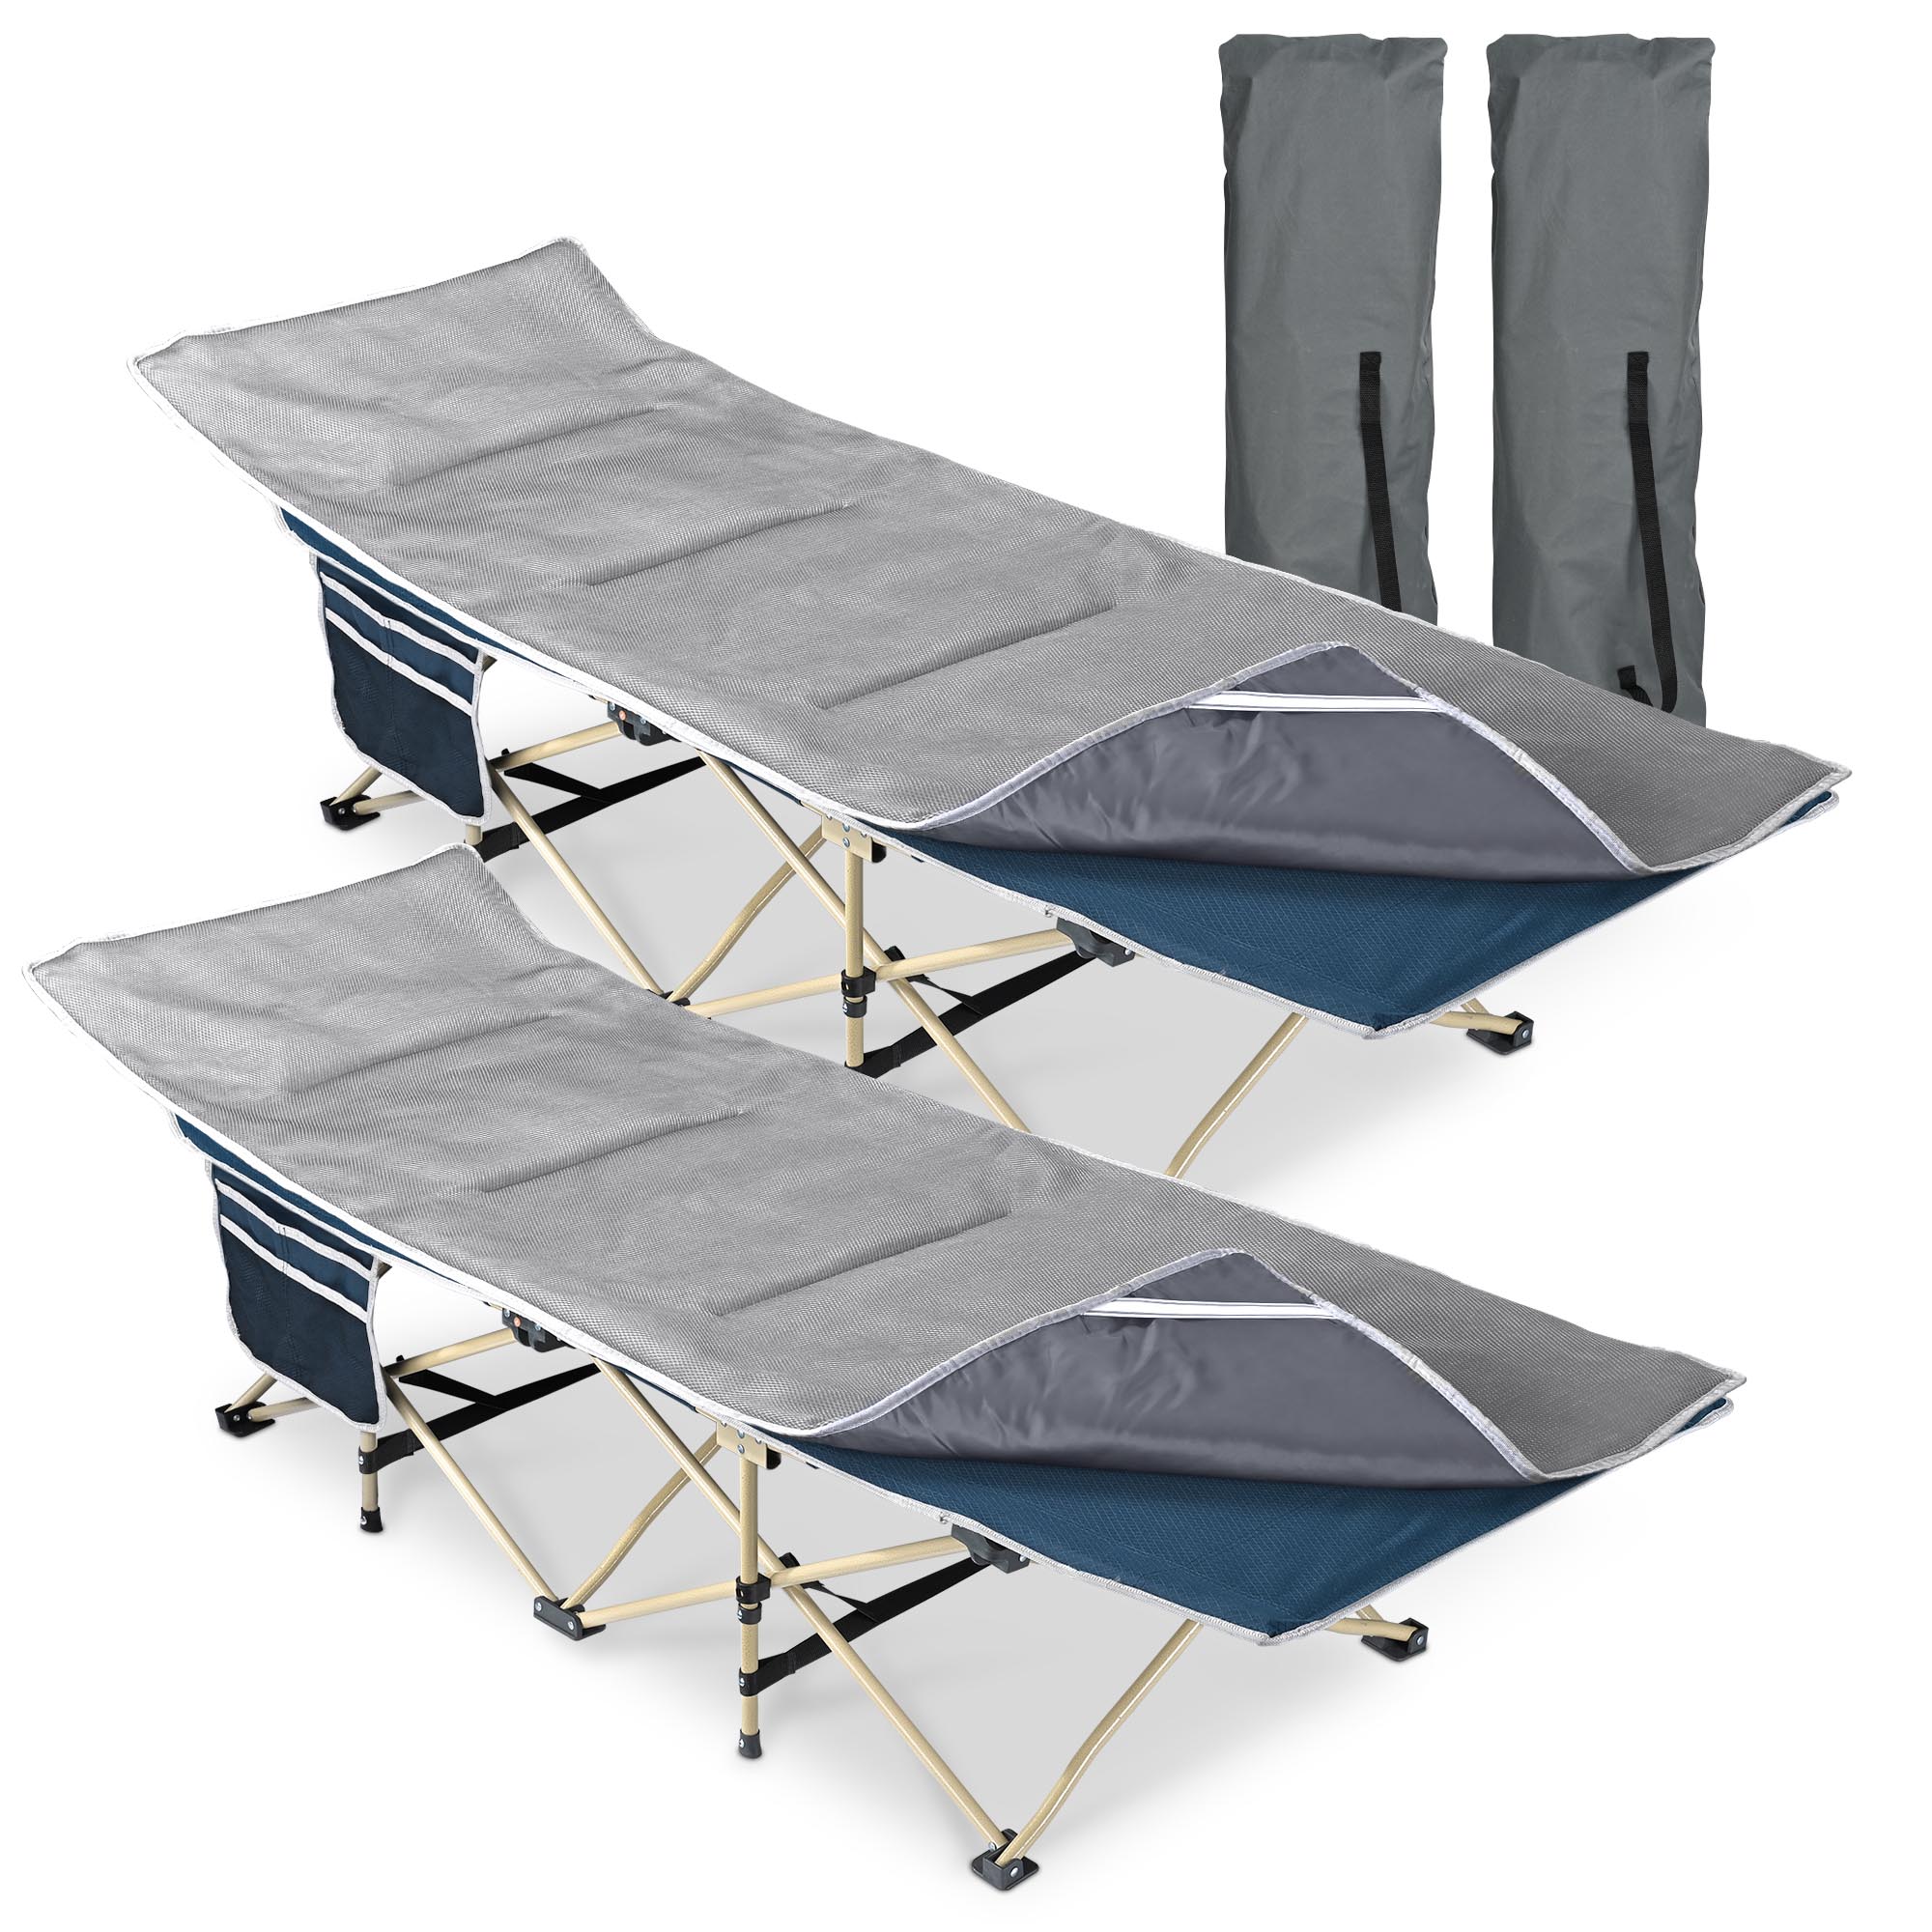 Yescom Folding Cot Collapsible Camping Bed with Carrying Bag Travel Outdoor Home 2 Pack